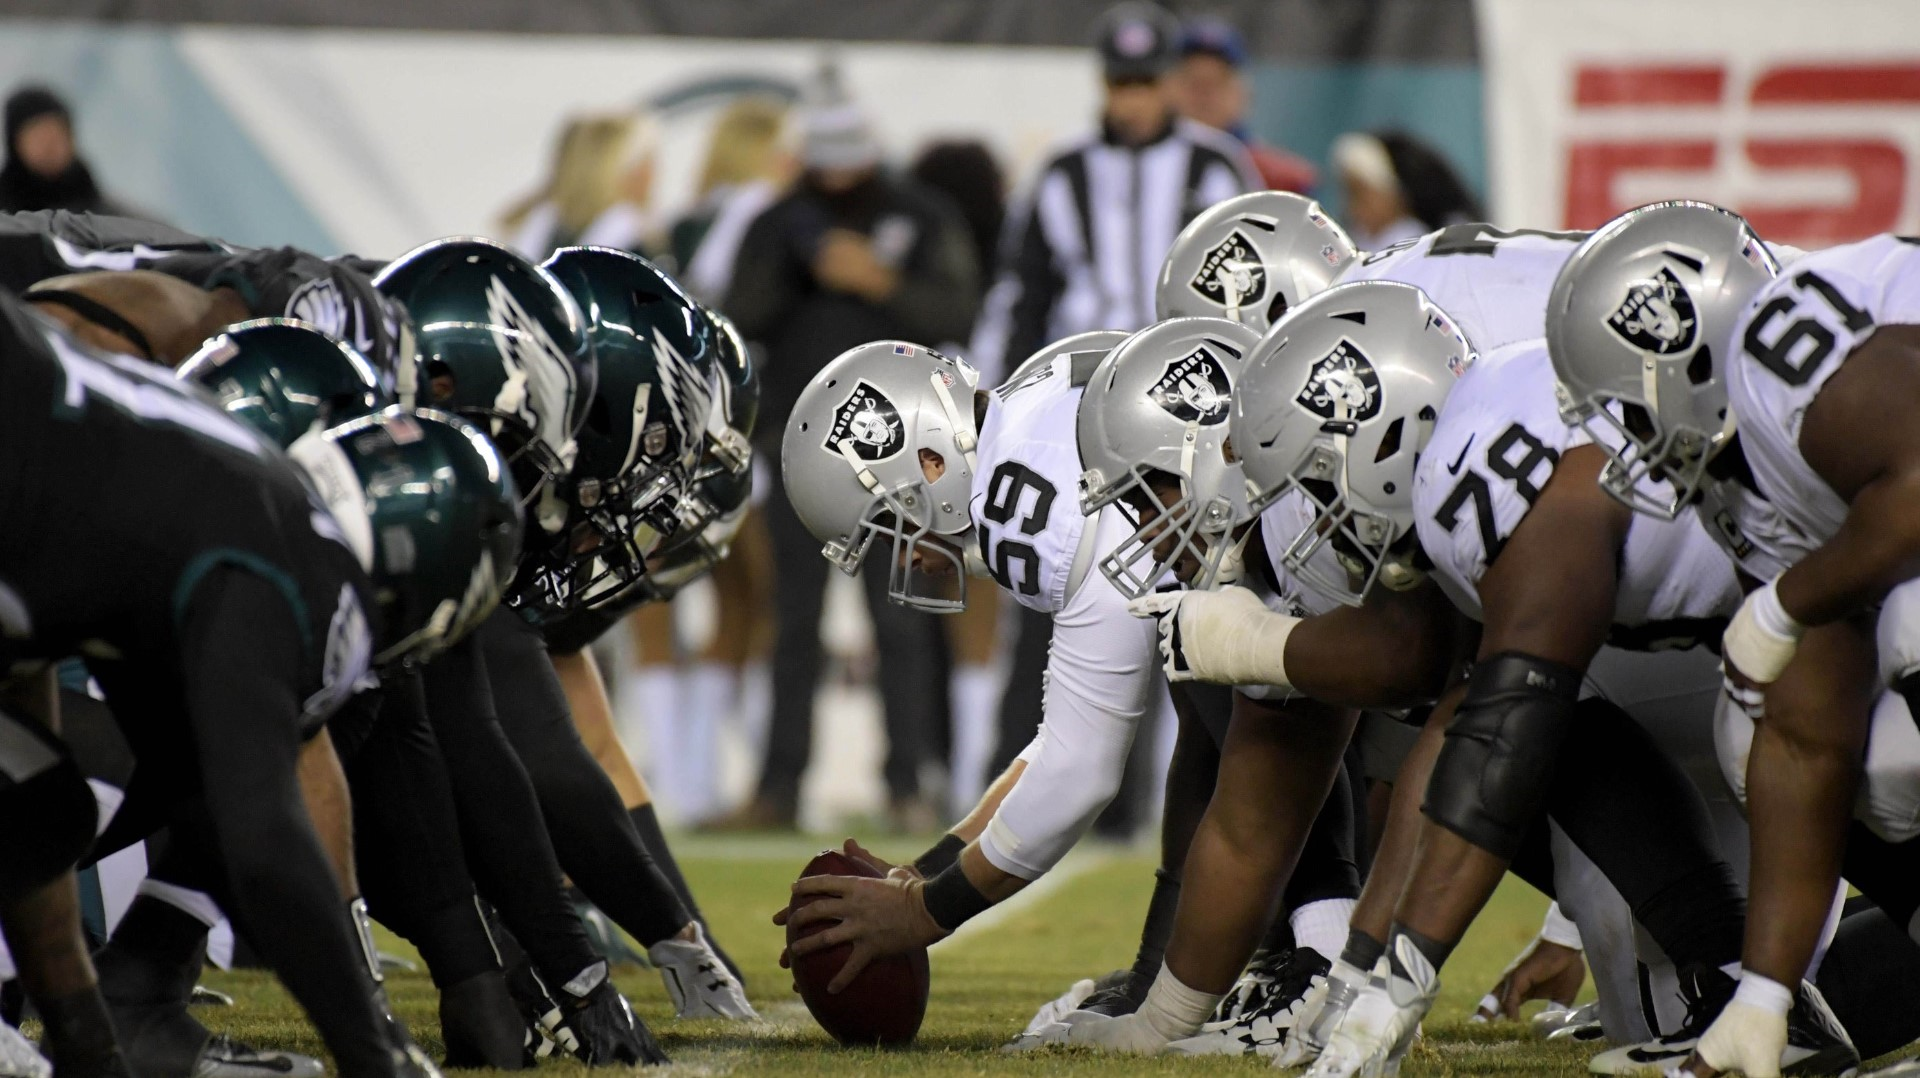 Eagles clinch No. 1 seed with 19-10 win over Raiders